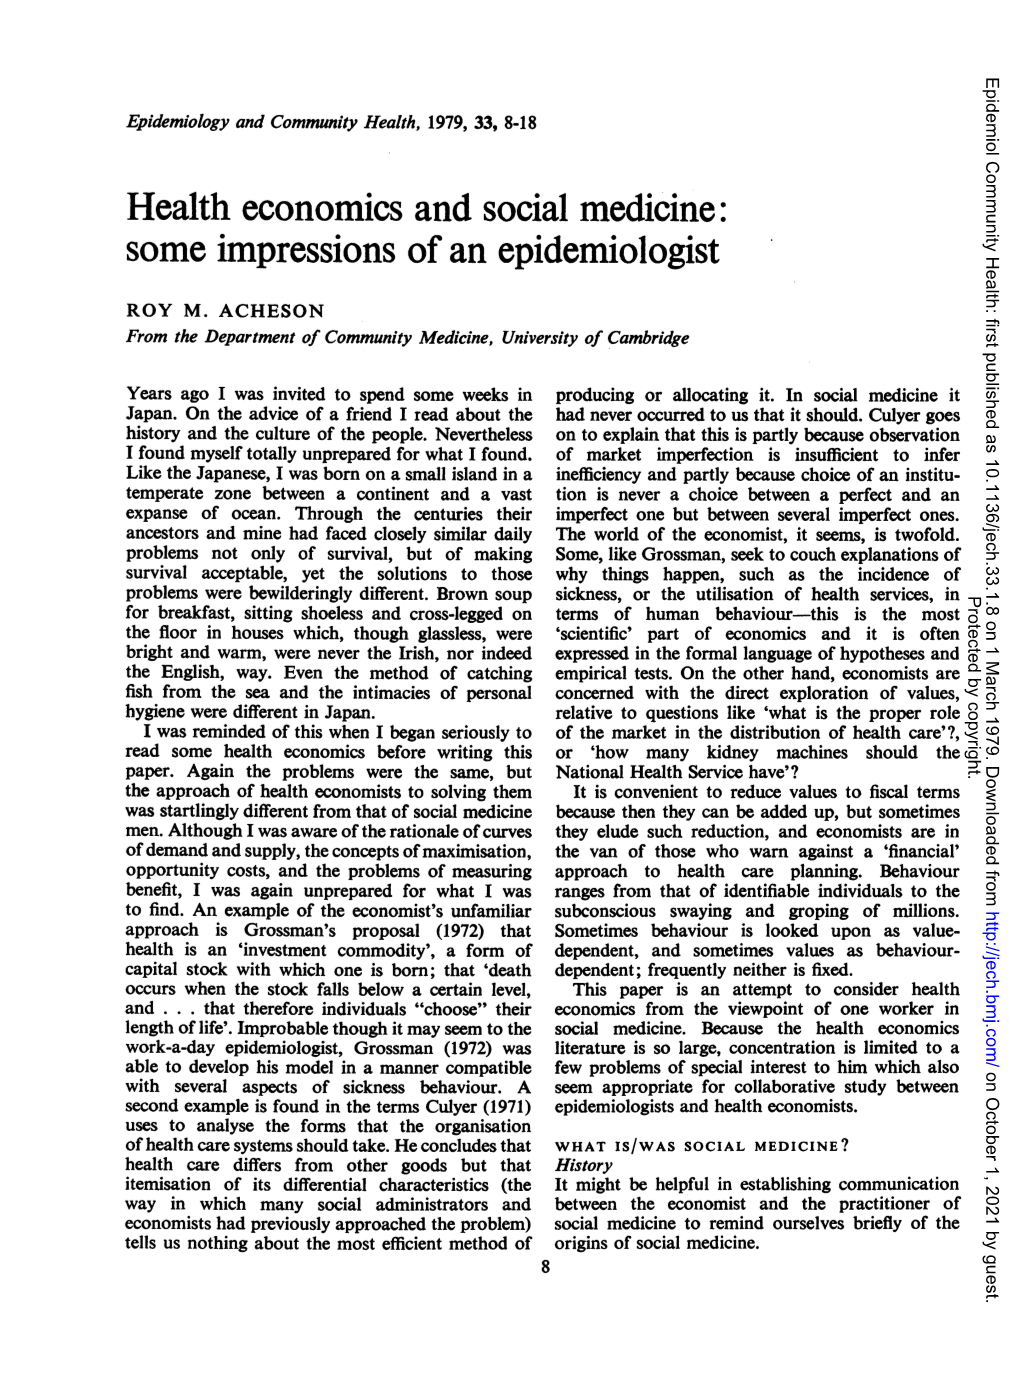 Health Economics and Social Medicine: Some Impressions of an Epidemiologist